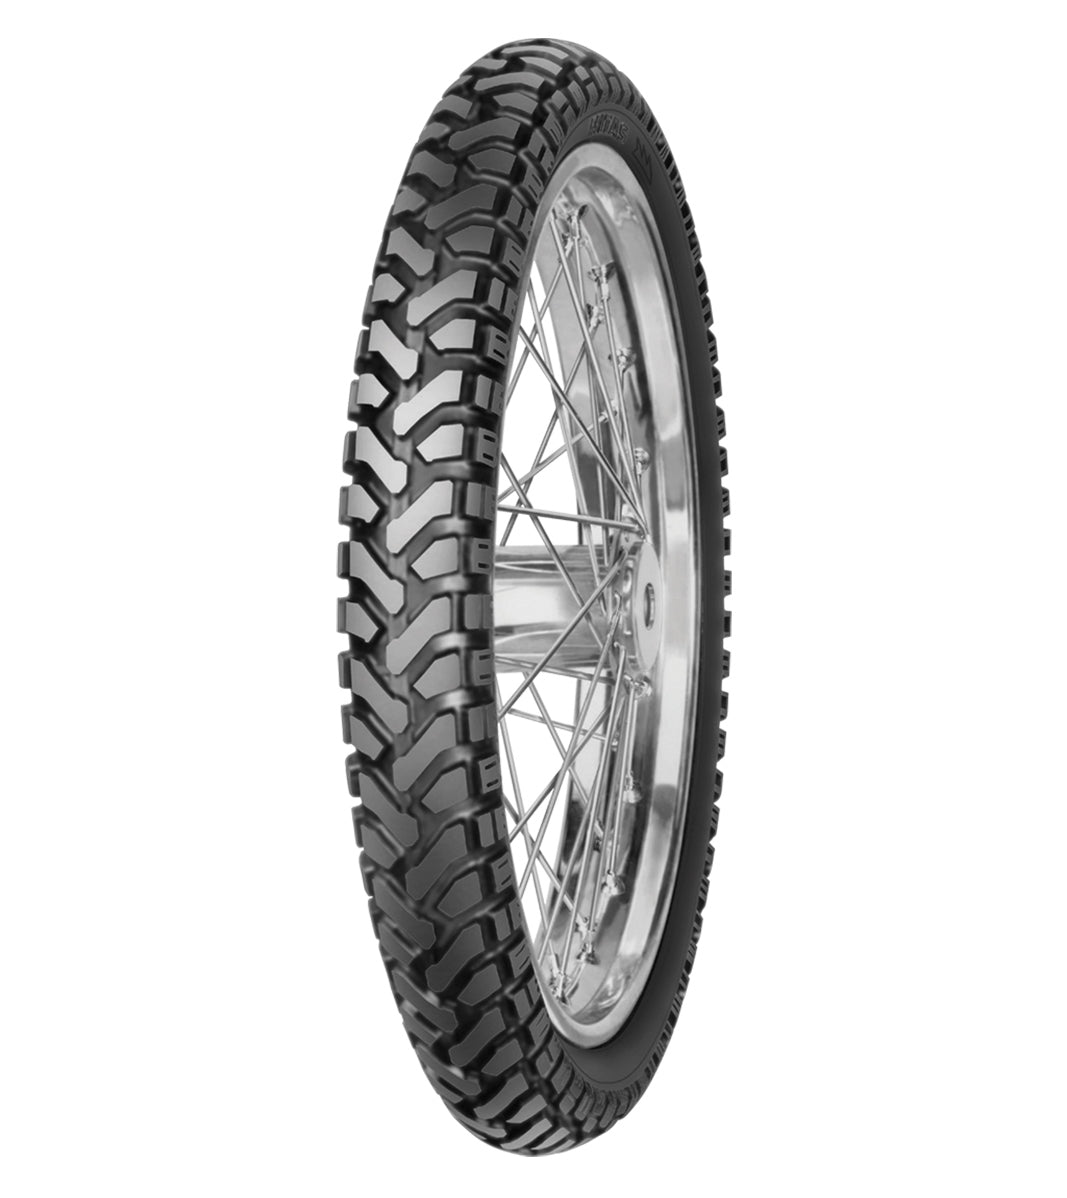 Mitas E-07 ENDURO 110/80-19 Trail OFF Trail 59T No Stripe Tubeless Front Tire, 224439, 110/80-19, Adventure Touring, E Series, E-07 Enduro, Front, Trail, Trail OFF, Tires - Imported and distributed in North &amp; South America by Lindeco Genuine Powersports - Premier Powersports Equipment and Accessories for Motorcycle Enthusiasts, Professional Riders and Dealers.